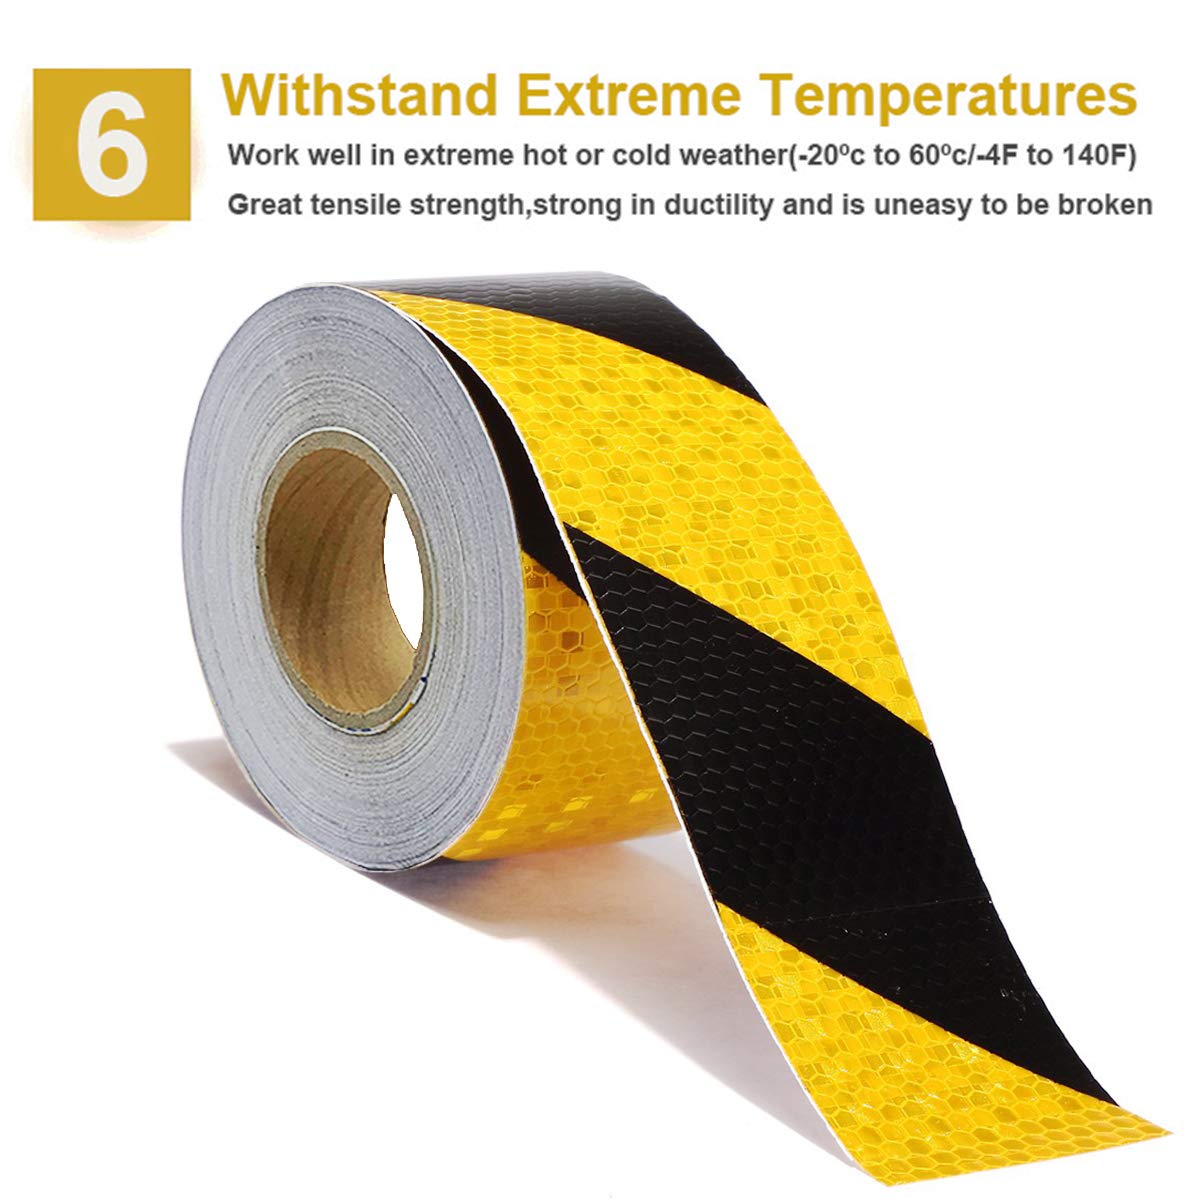 Waterproof Reflective Safety Tape Roll 2"X150' Yellow Black Striped Floor Marking Tape Hazard Caution Warning Tape Auto Truck Self-Adhesive Safety Sticker Strips for Wall Factory Trailer Vehicle